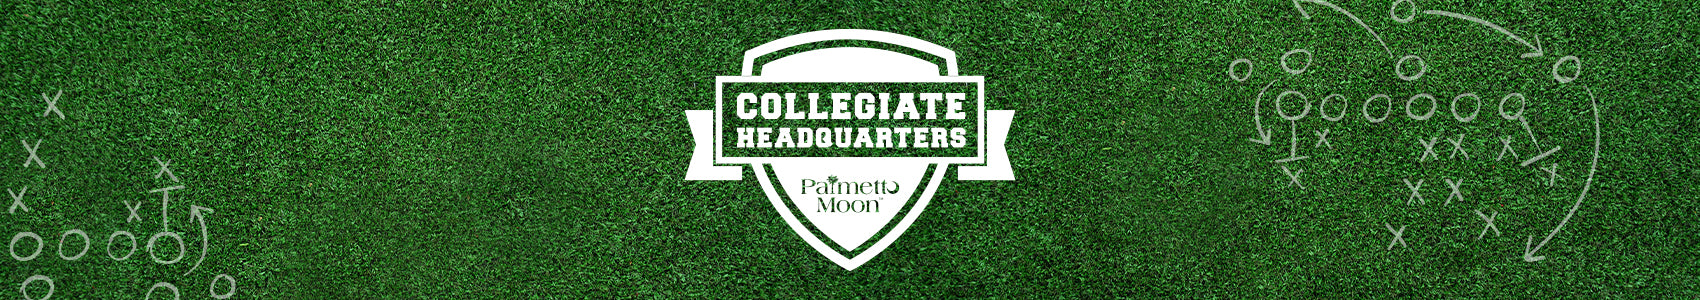 The Palmetto Moon Collegiate Headquarters logo over football field grass makes you want to gear up for gameday! Shop collegiate fan gear and apparel and rep your school spirit!